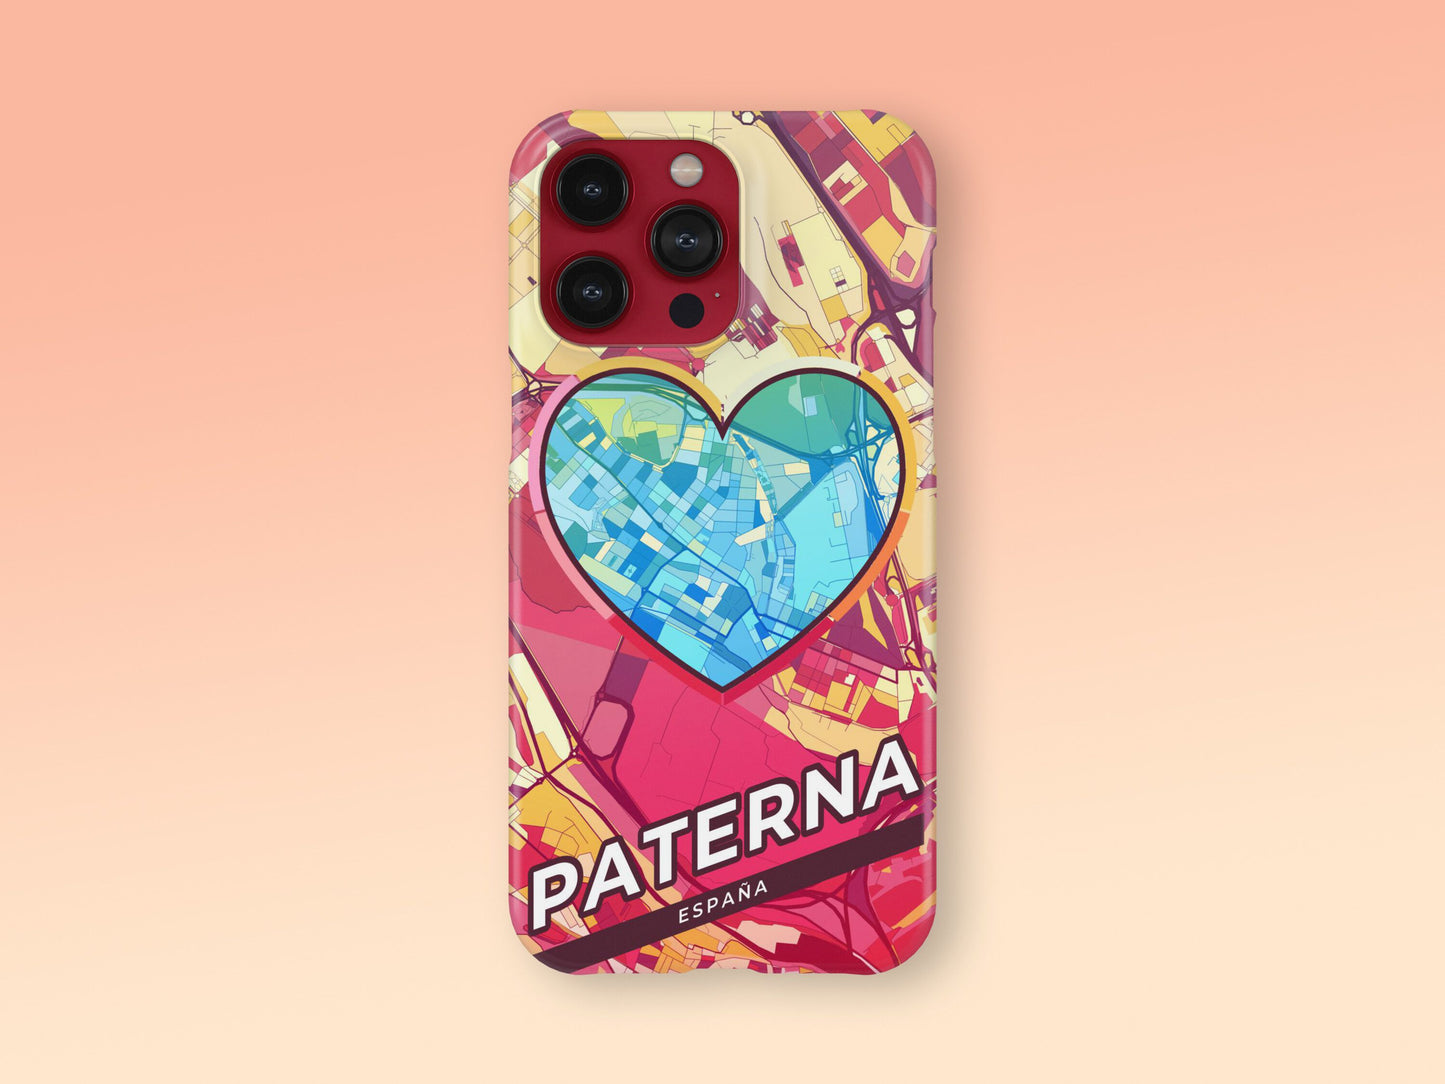 Paterna Spain slim phone case with colorful icon 2